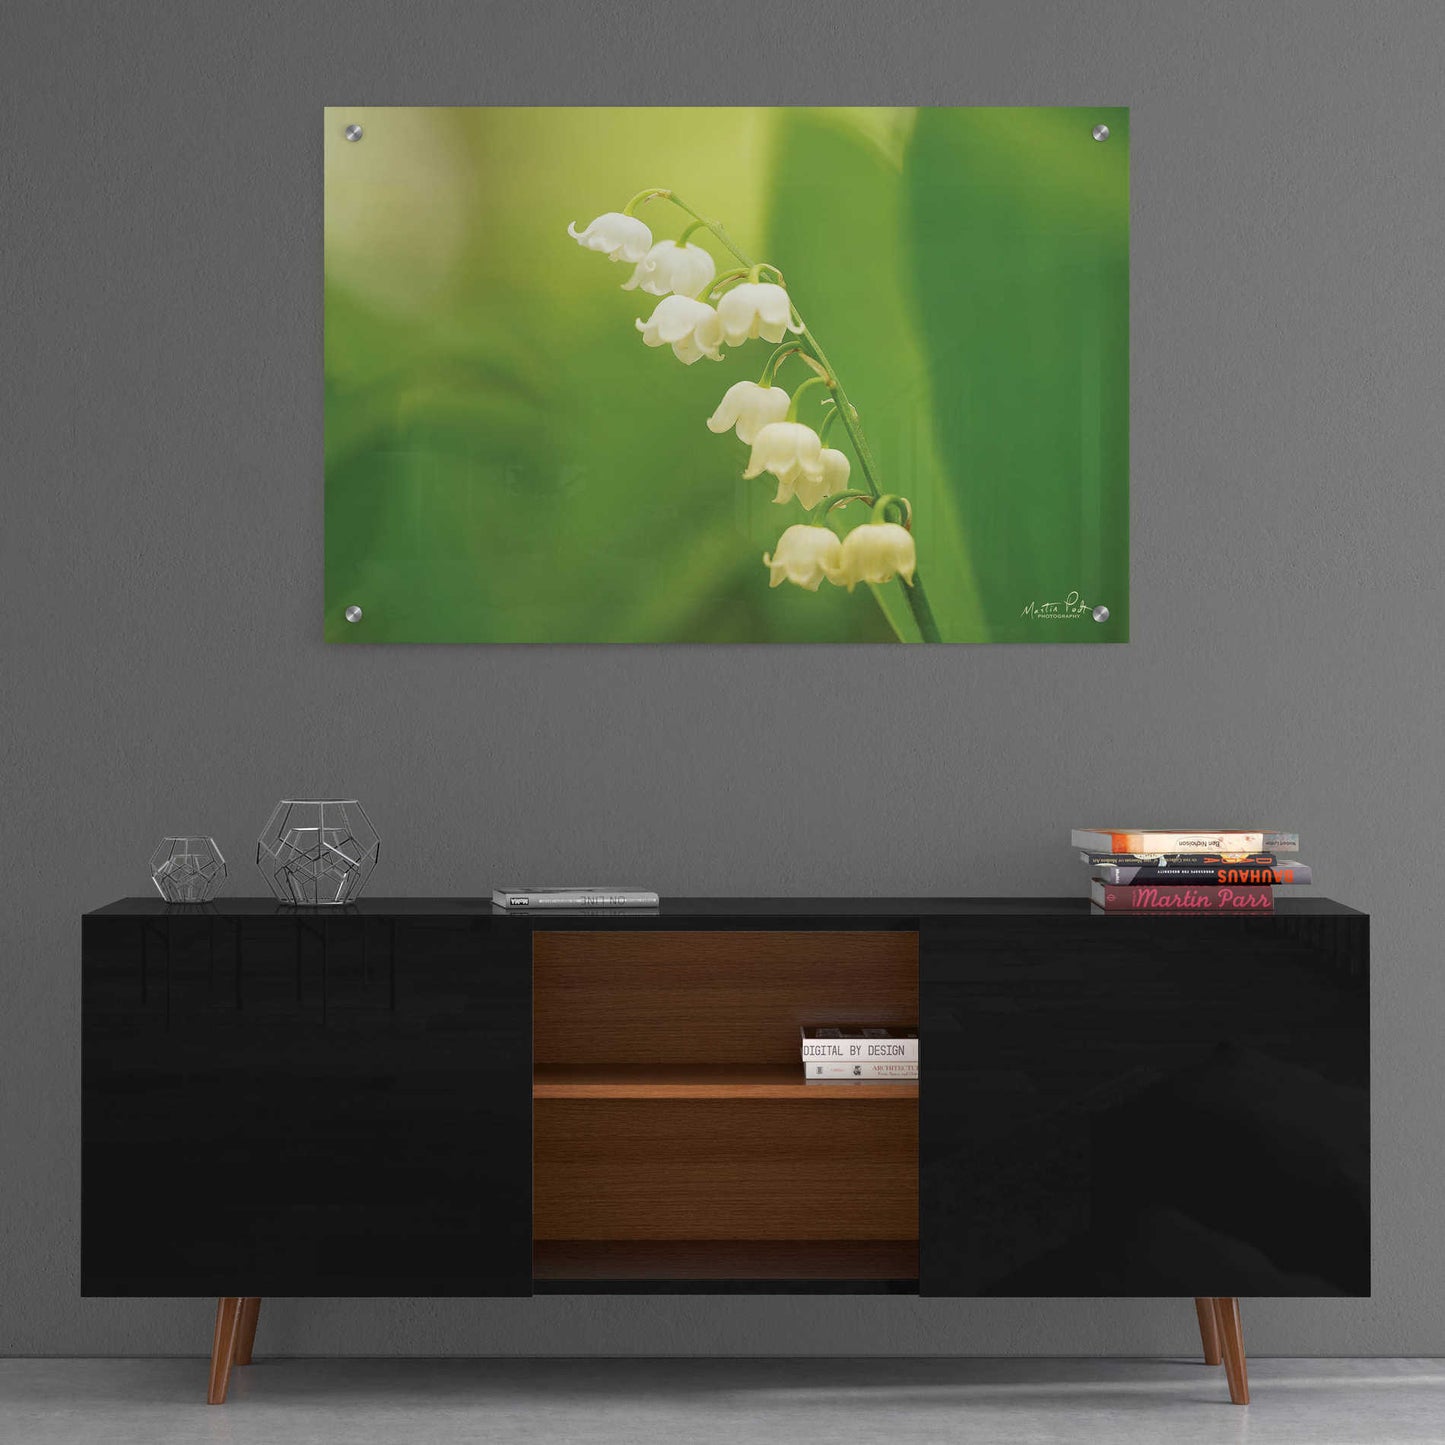 Epic Art 'Lily of the Valley' by Martin Podt, Acrylic Glass Wall Art,36x24